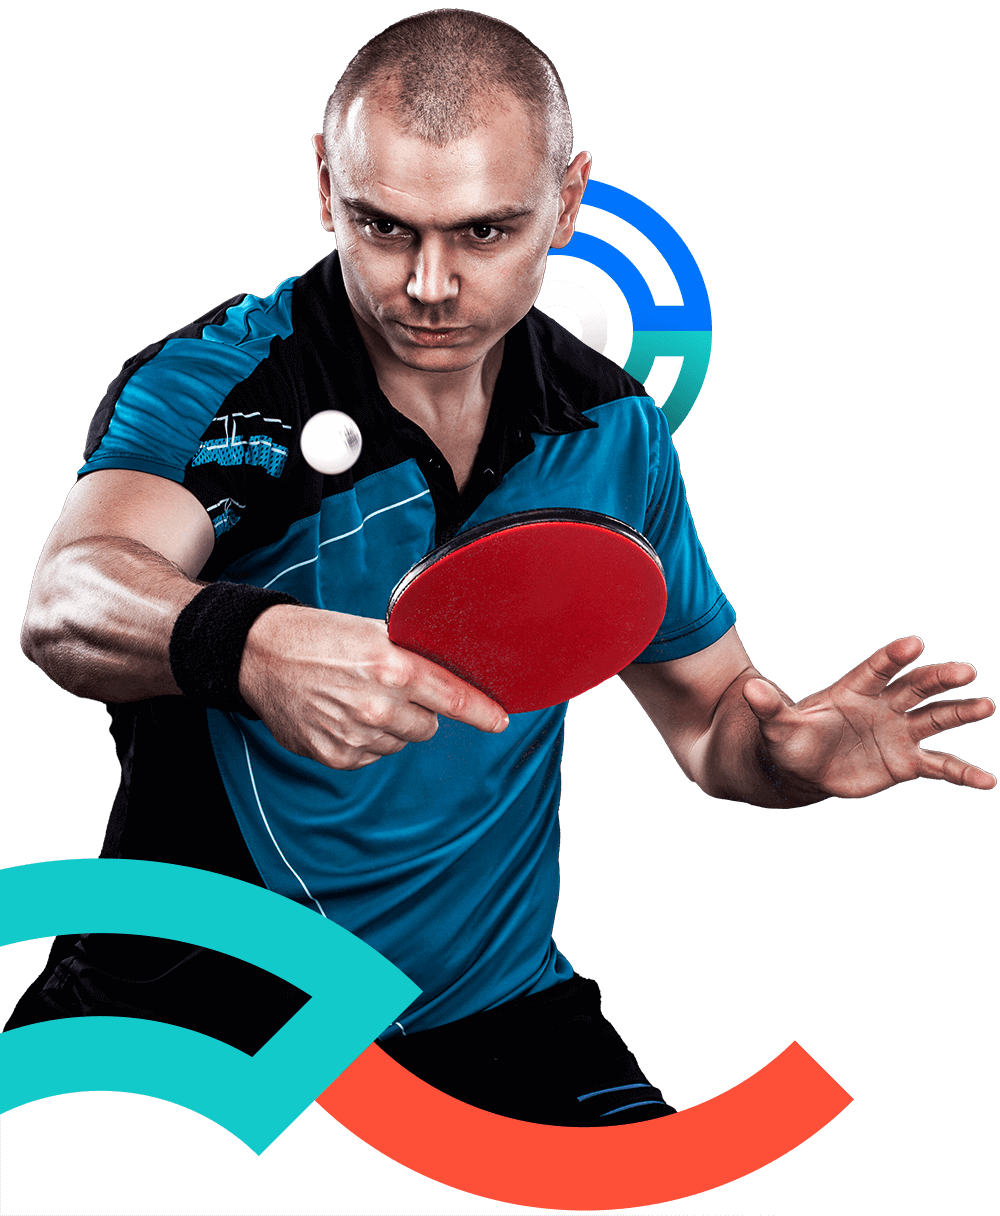 In the picture, a male table tennis athlete about to hit the ball.